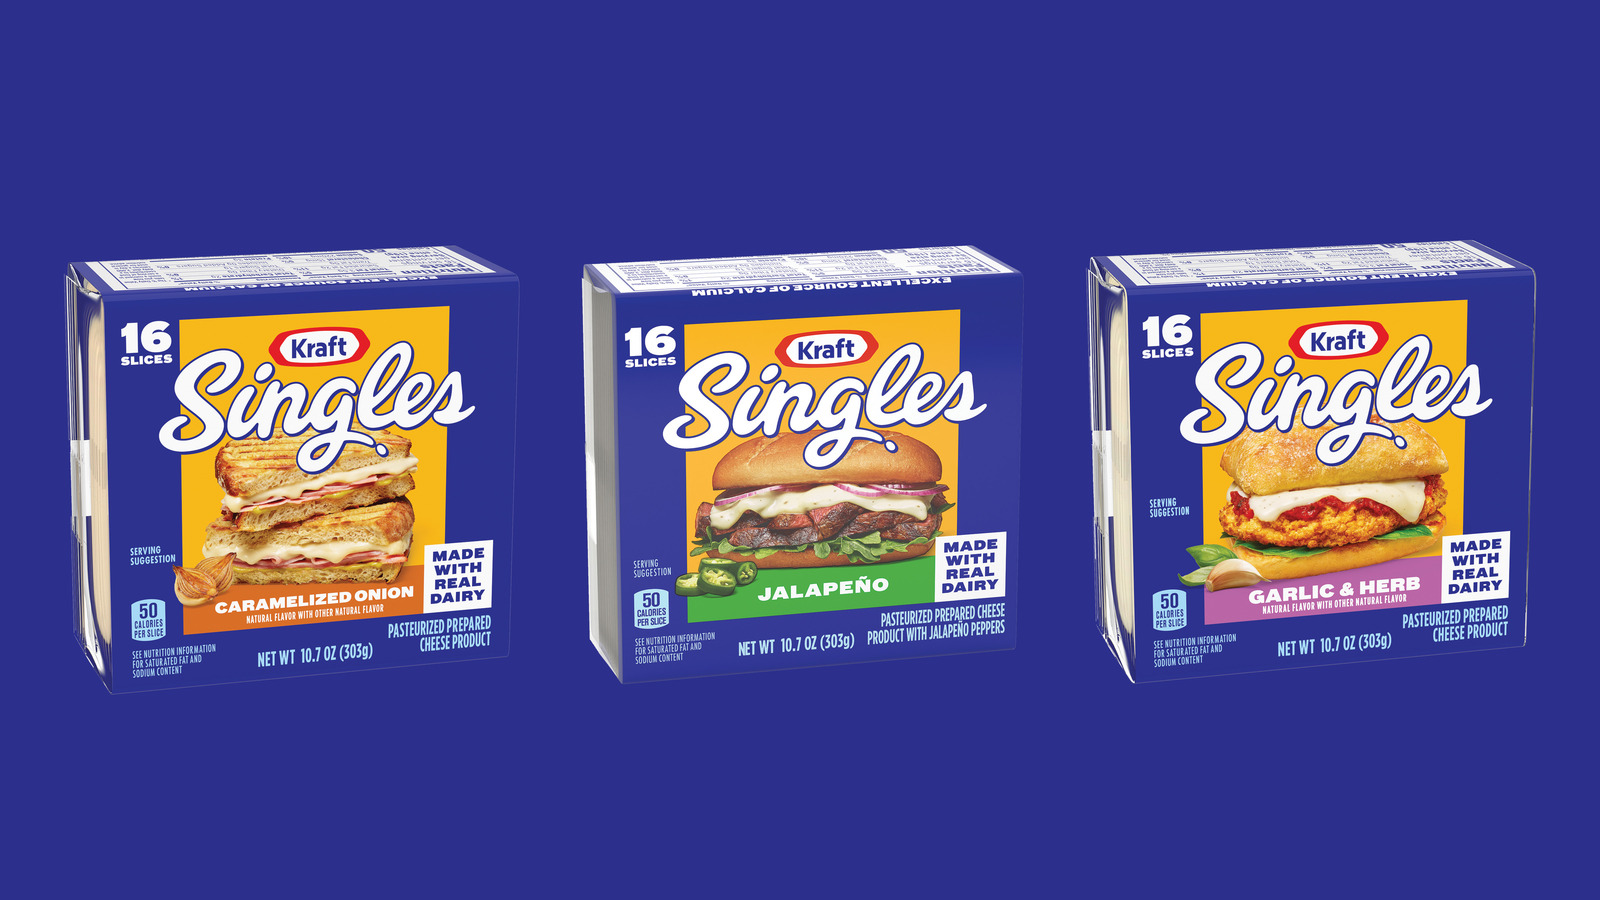 Kraft Singles' 3 new cheese flavors have been a decade in the making